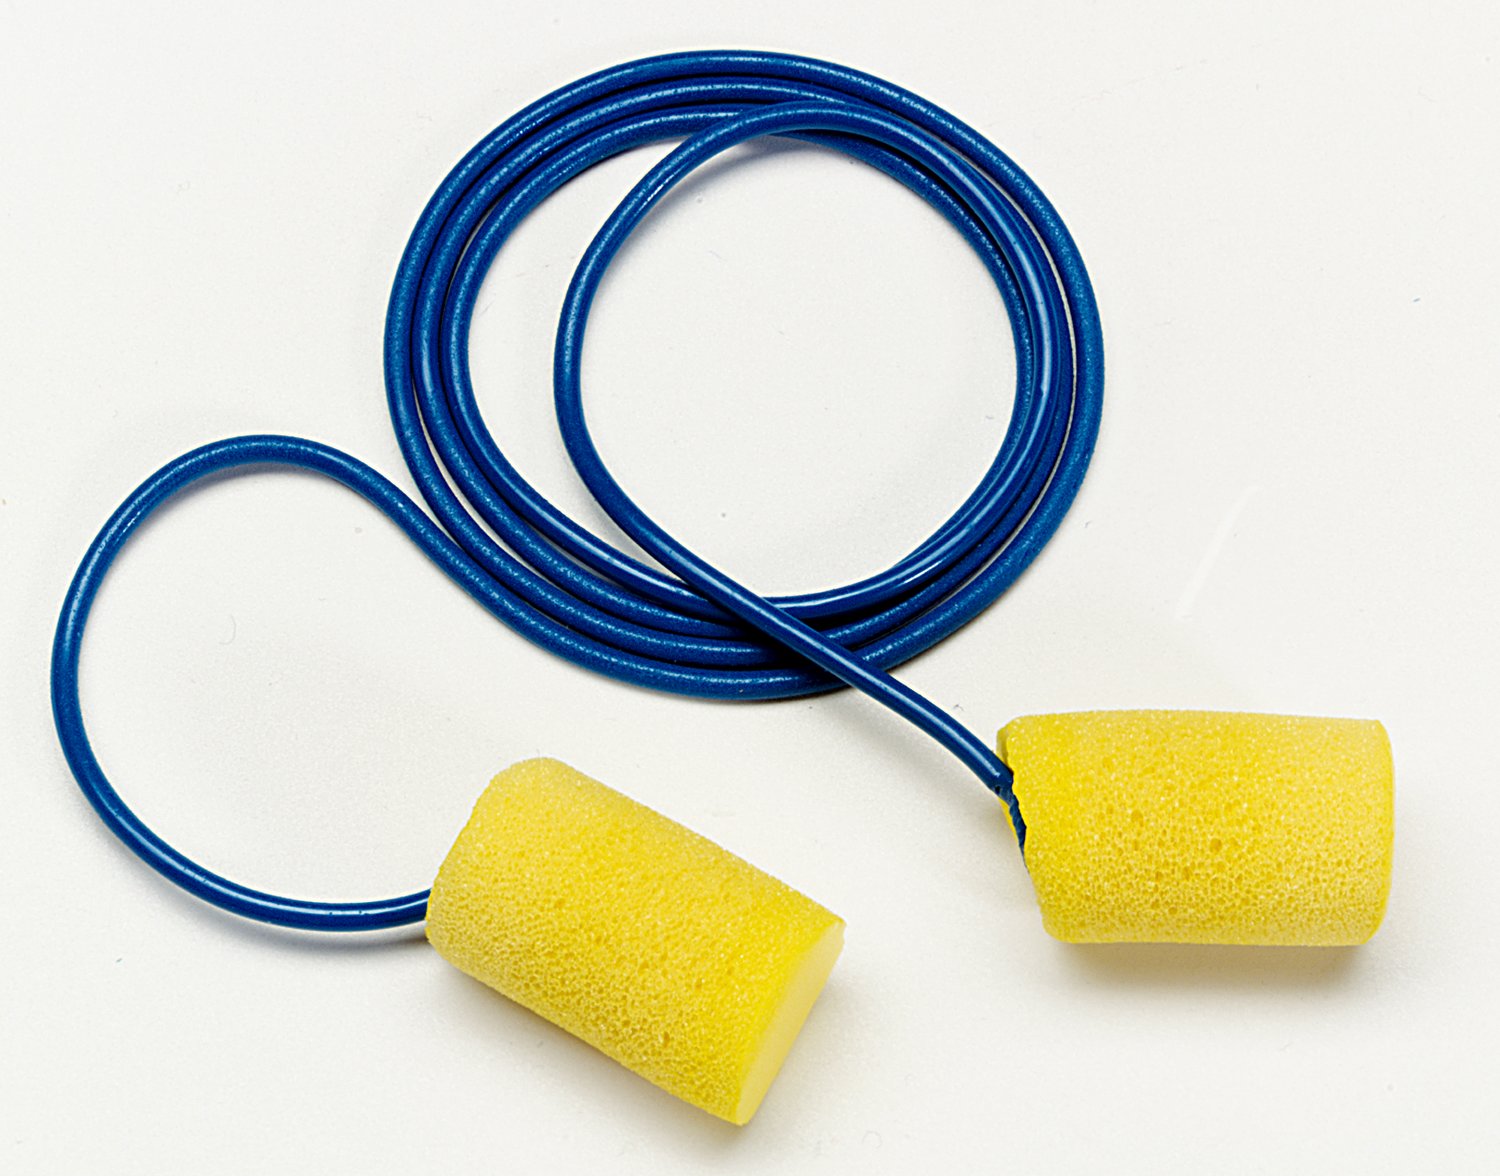 7000127173 - 3M E-A-R Classic Earplugs 311-1106, Corded, Small Size, Poly Bag,
2000 Pair/Case